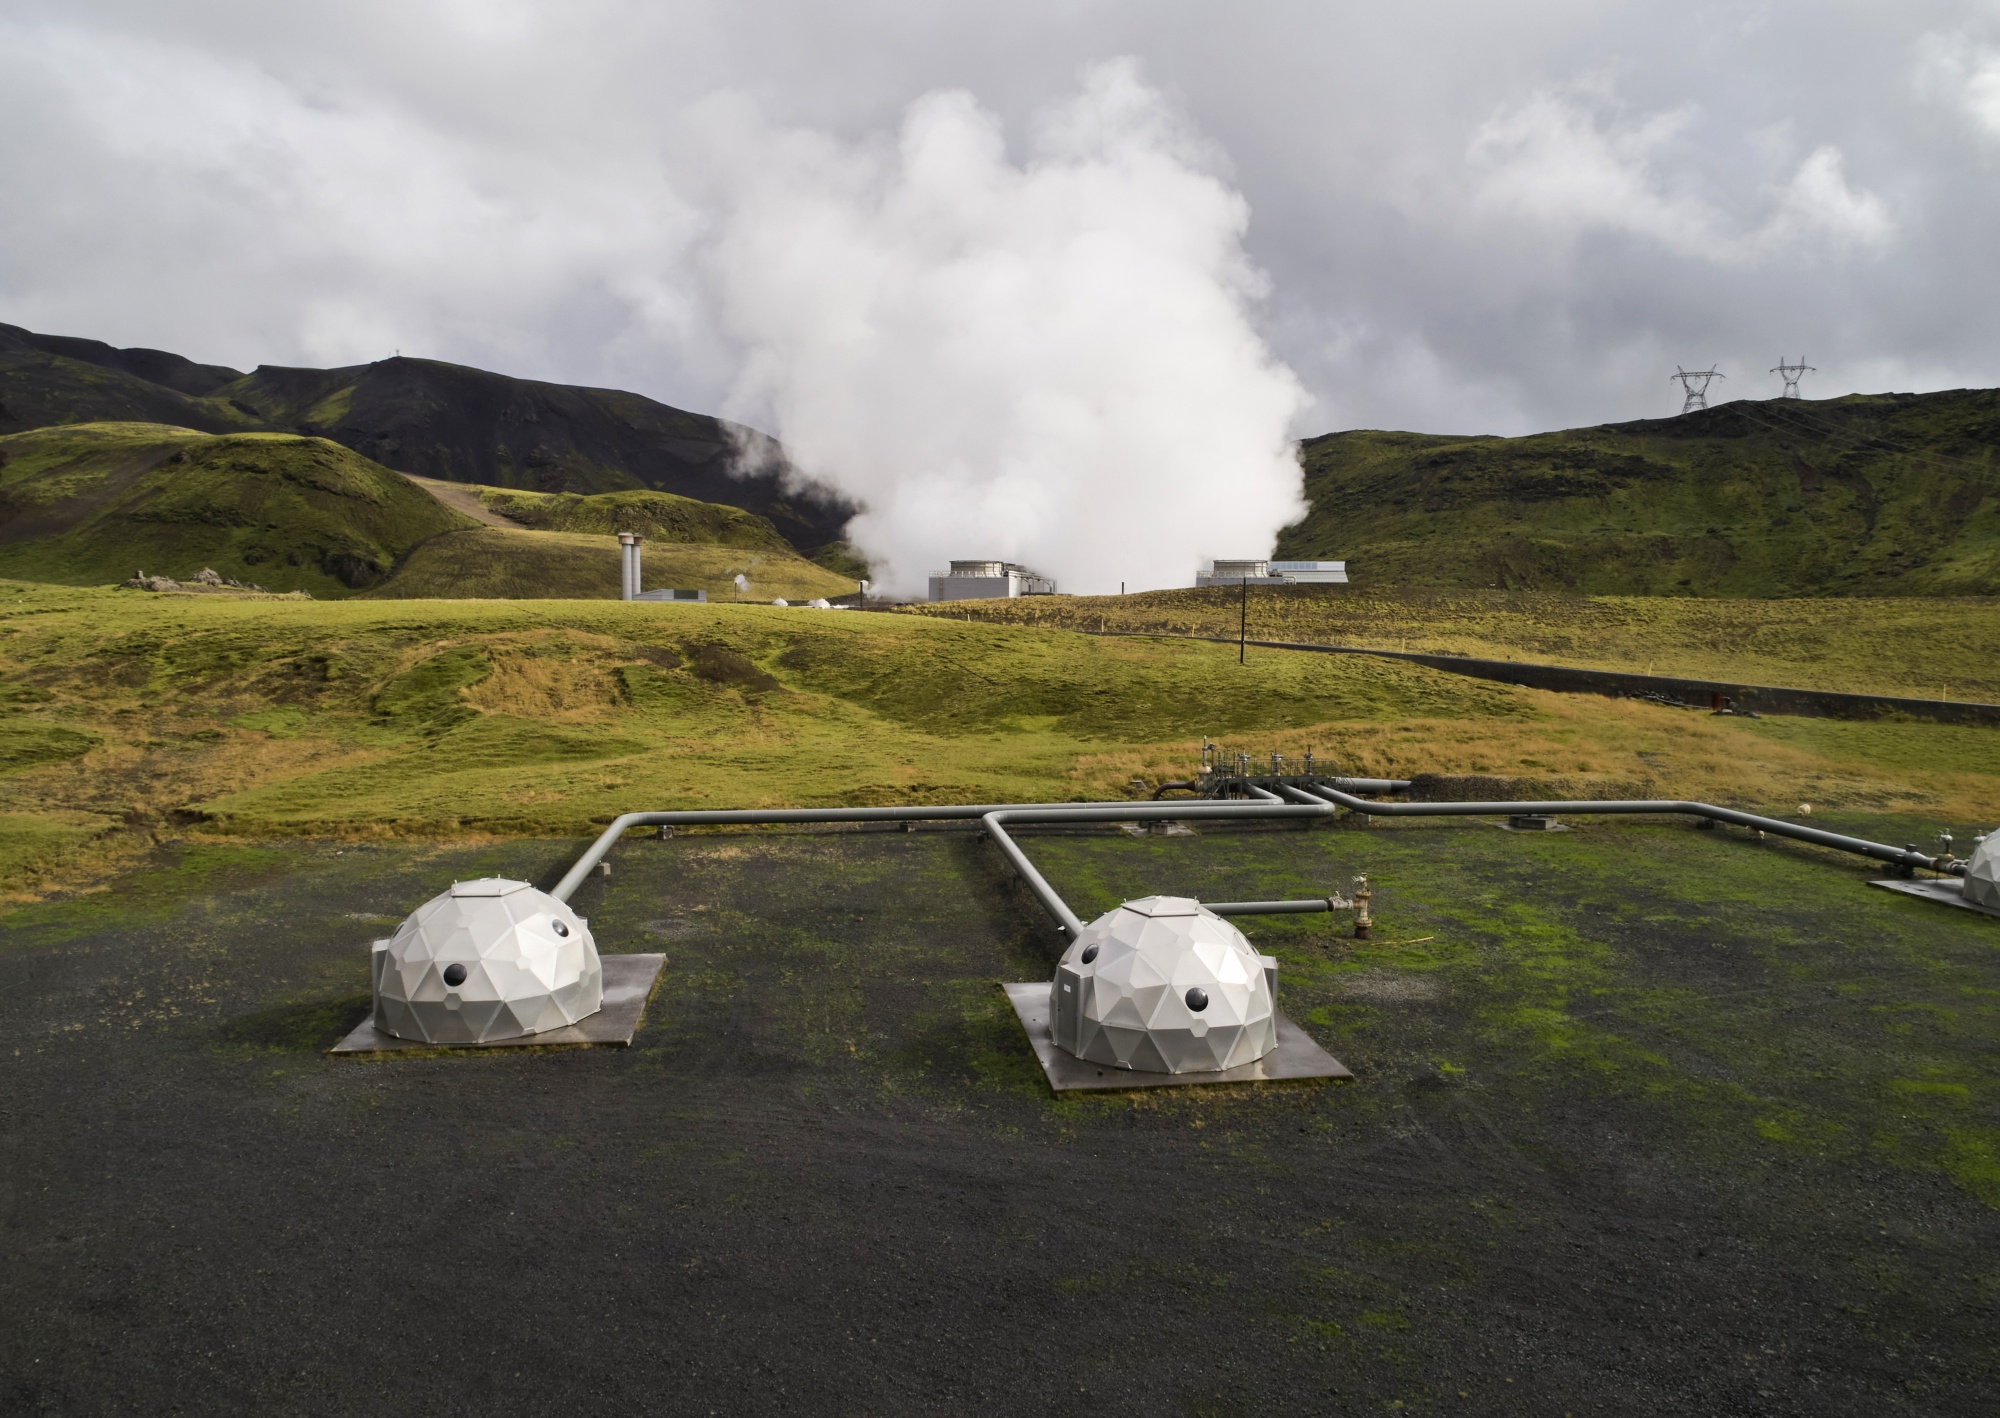 Over the past century, geothermal resources have&nbsp;transformed Iceland from impoverished nation to the 15th richest country in the world.&nbsp;